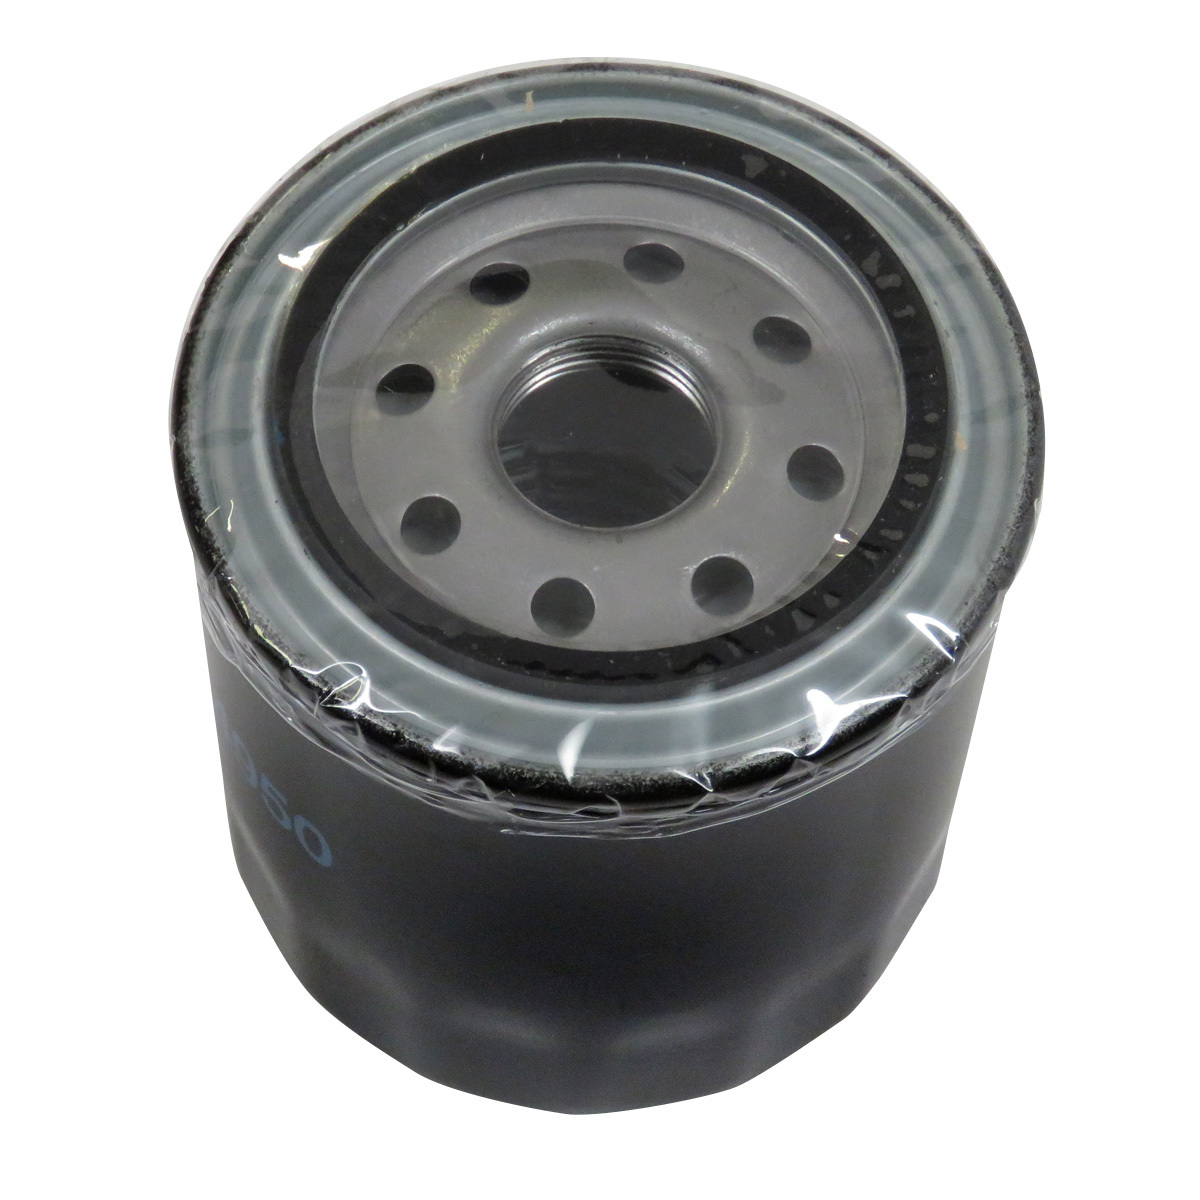 Transmission Filter for 400, X400, X500 and X700 Series